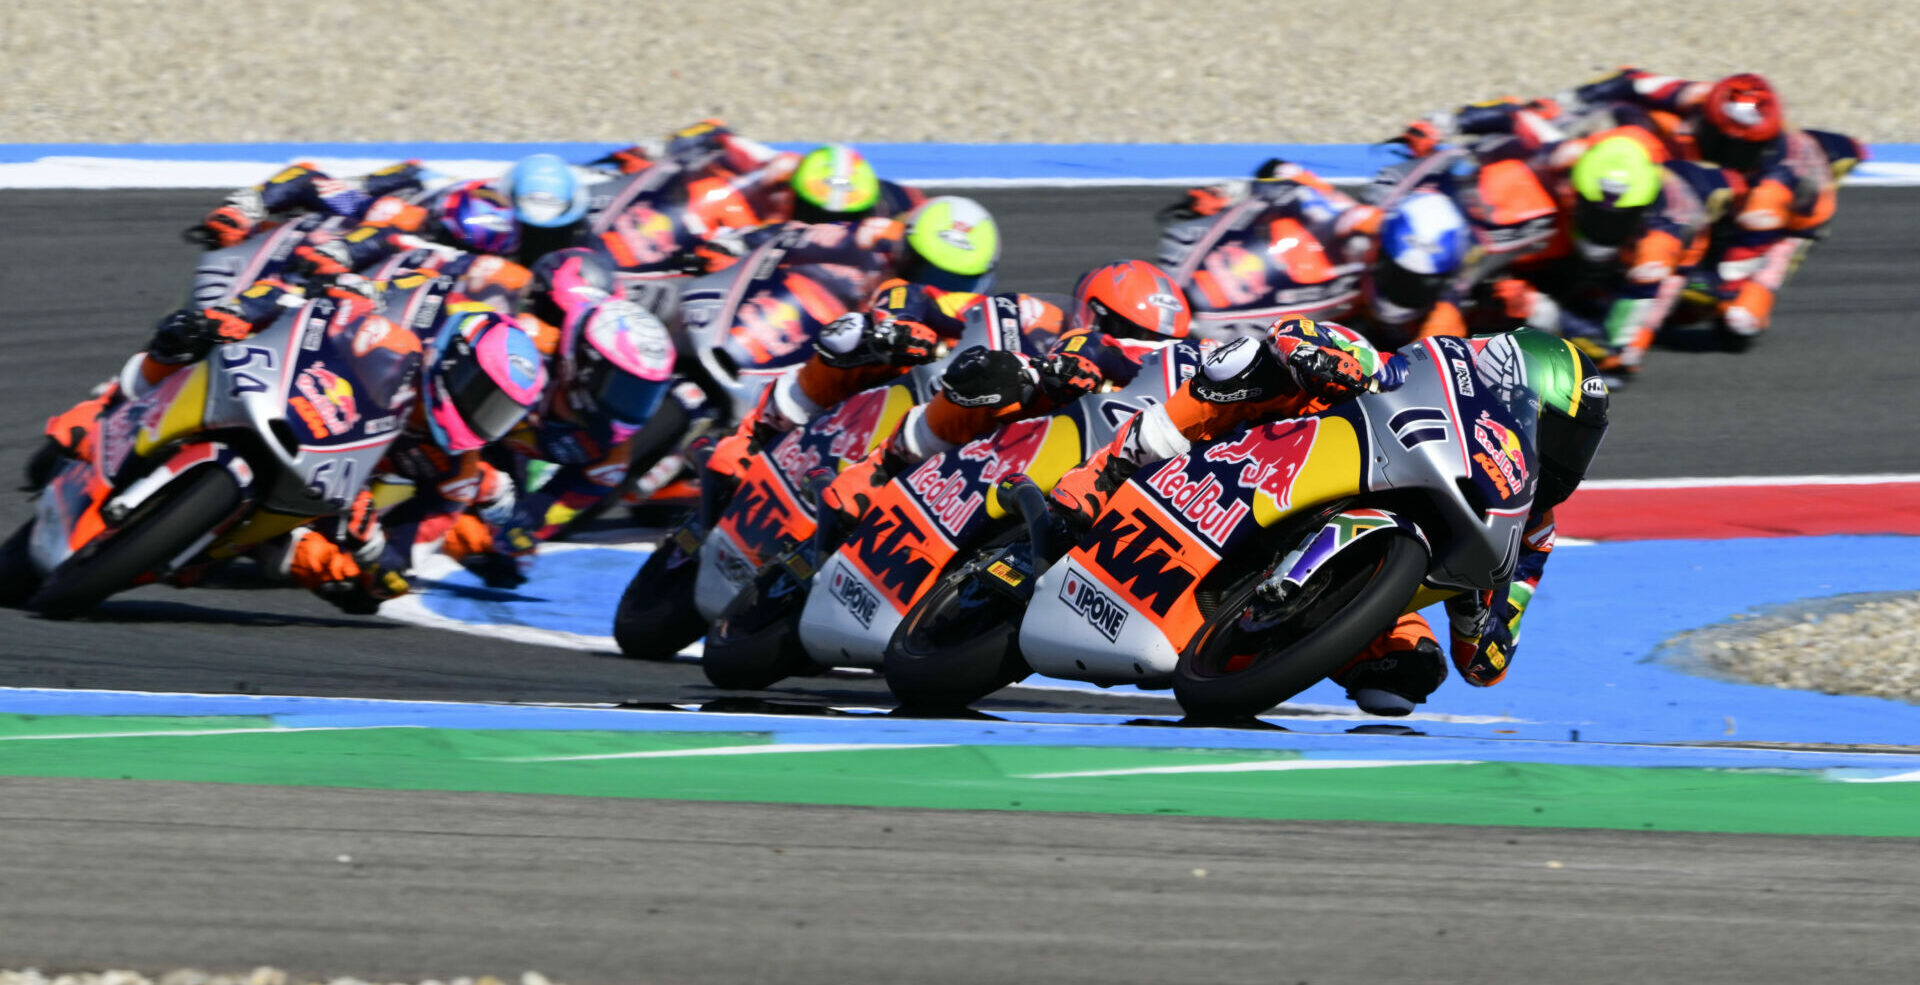 Ruche Moodley (11) leads early in Red Bull MotoGP Rookies Cup Race One. Photo courtesy Red Bull.